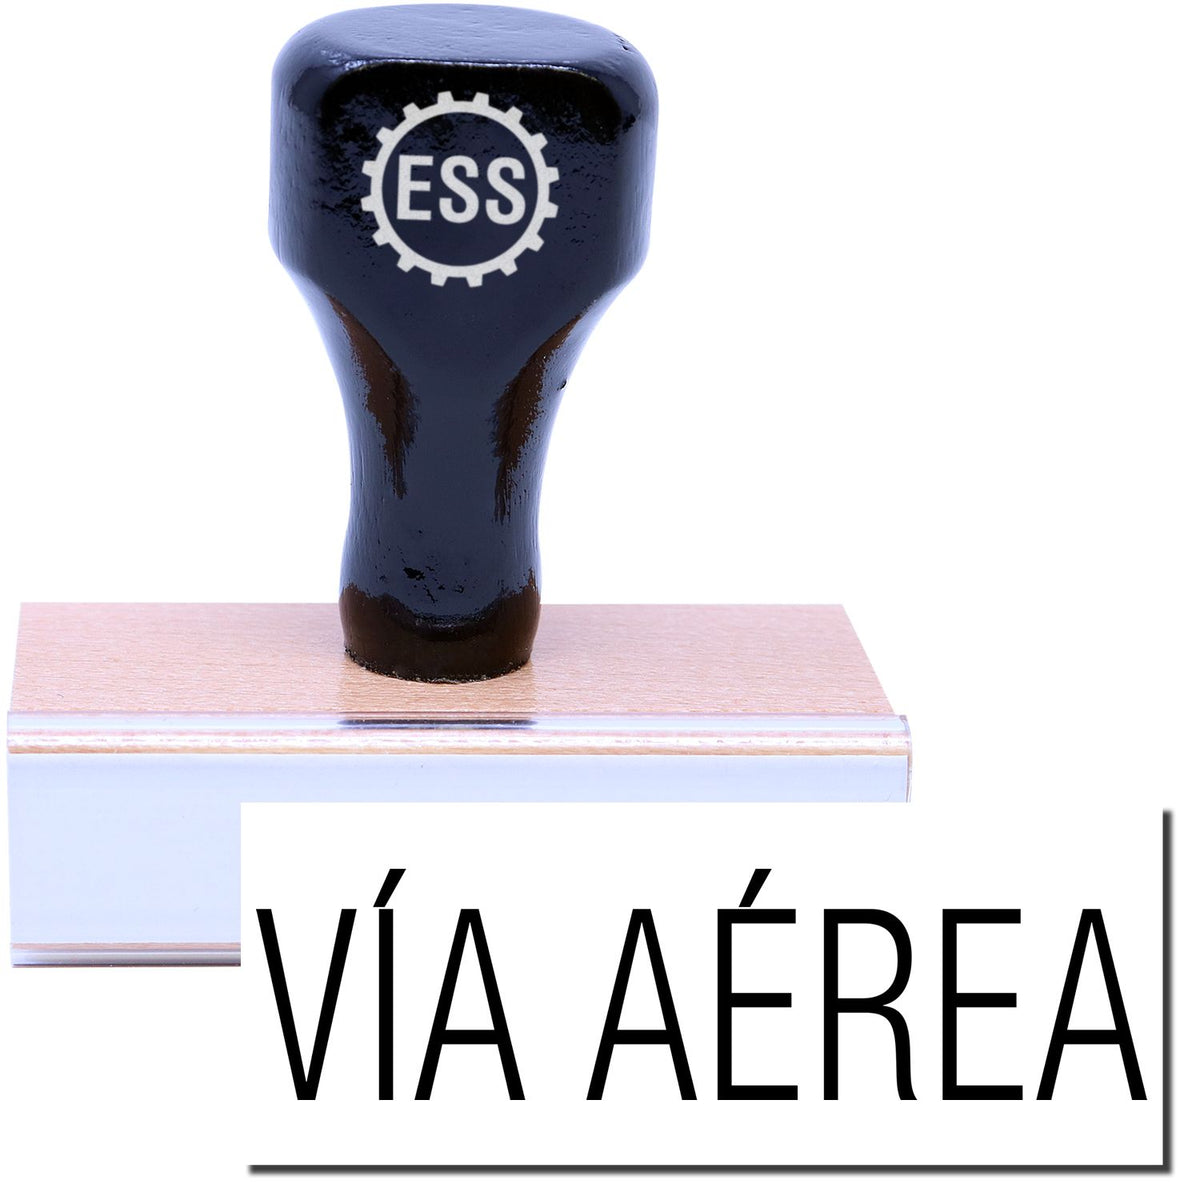 A stock office rubber stamp with a stamped image showing how the text &quot;VIA AEREA&quot; in a large font is displayed after stamping.